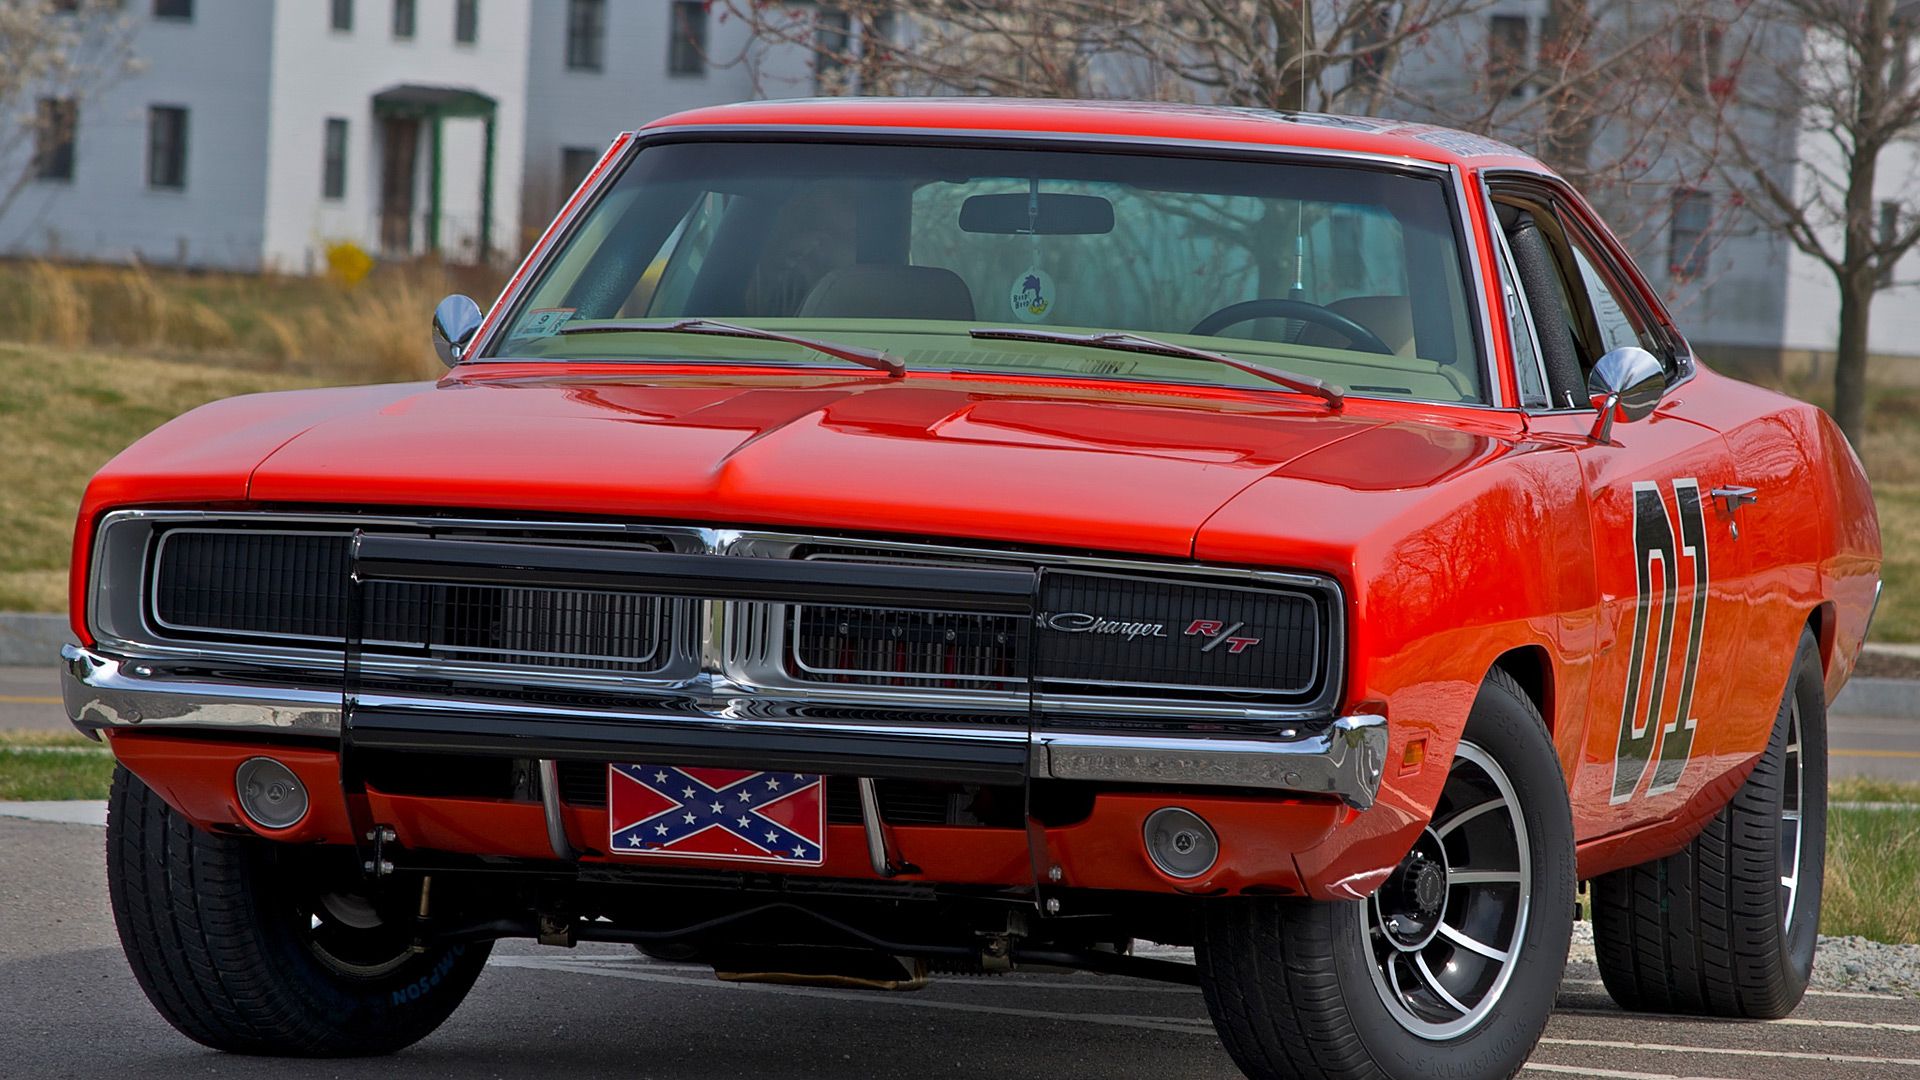 Free download 1969 Dodge Charger General Lee Wallpaper HD Image WSupercars [1920x1080] for your Desktop, Mobile & Tablet. Explore Dodge Charger 1969 Wallpaper. Dodge Charger 1969 Wallpaper, 1969 Dodge Charger Wallpaper, 1969 Dodge Charger RT